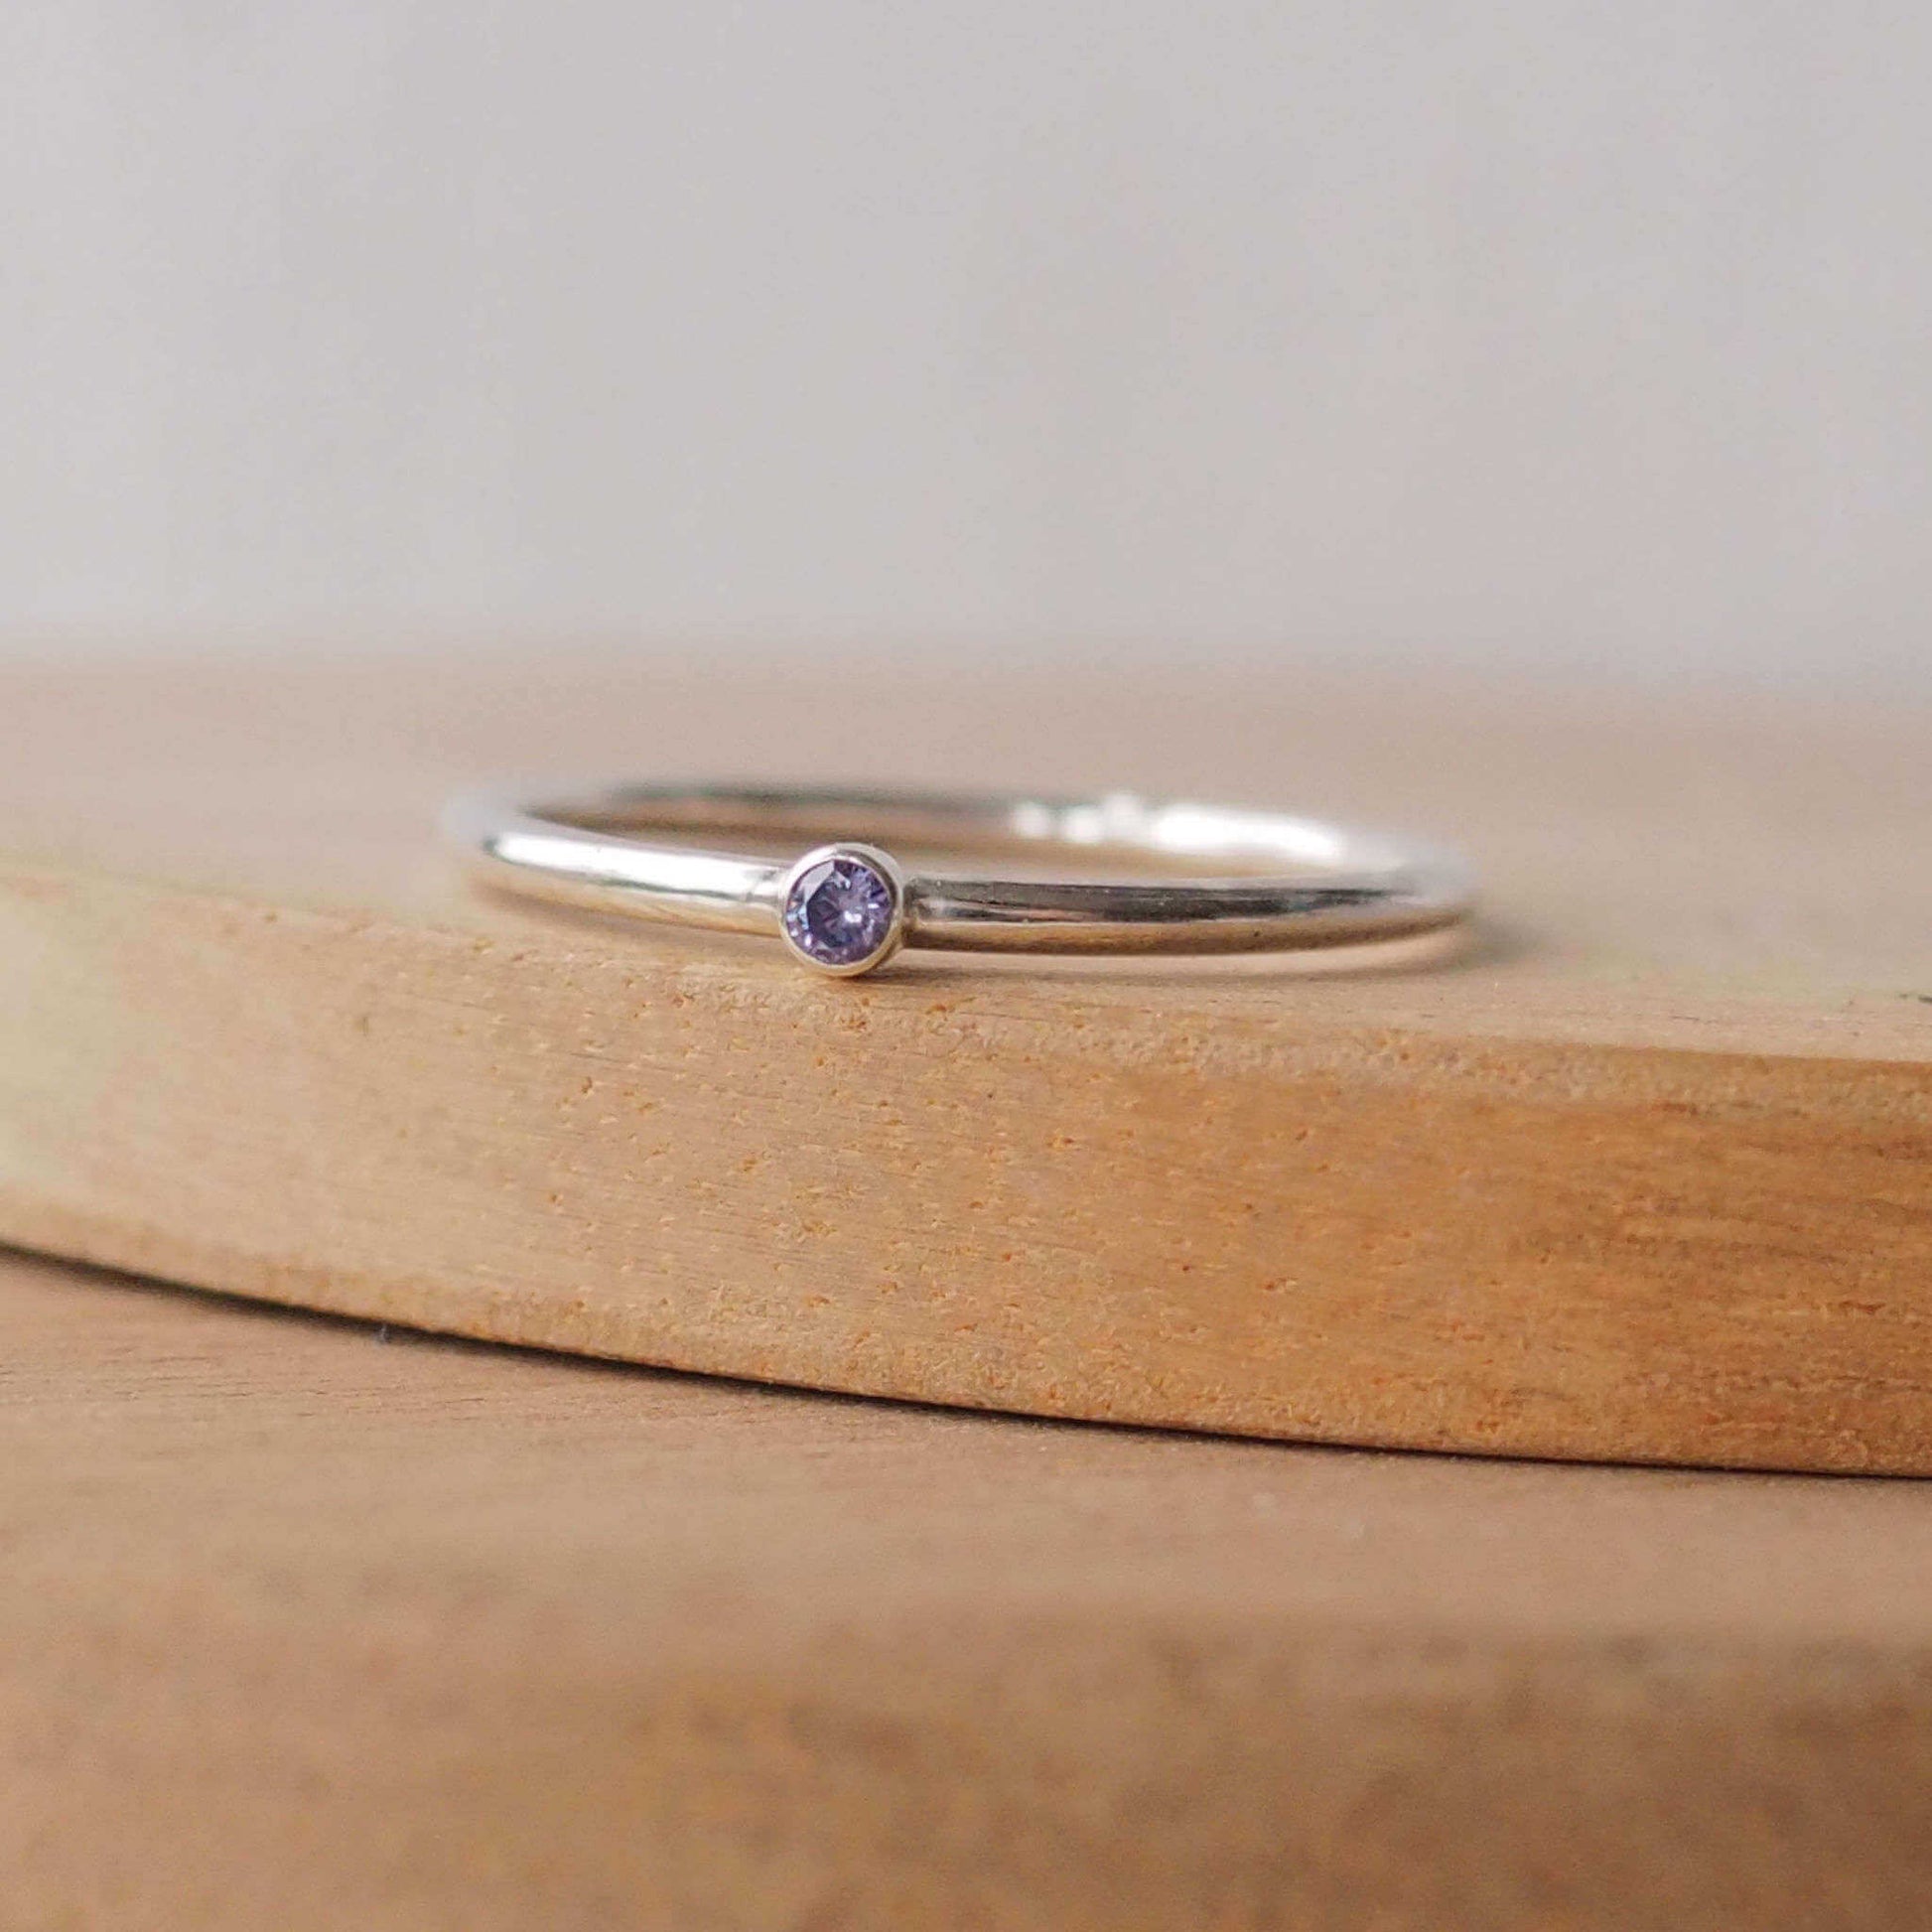 Simple Solitaire ring with a man made tanzanite gemstone. The ring is made from Sterling Silver and a very small round violet cubic zirconia measuring 2mm in size. It is sent onto a modern ring with a round profile. The ring is handmade by maram jewellery in Scotland